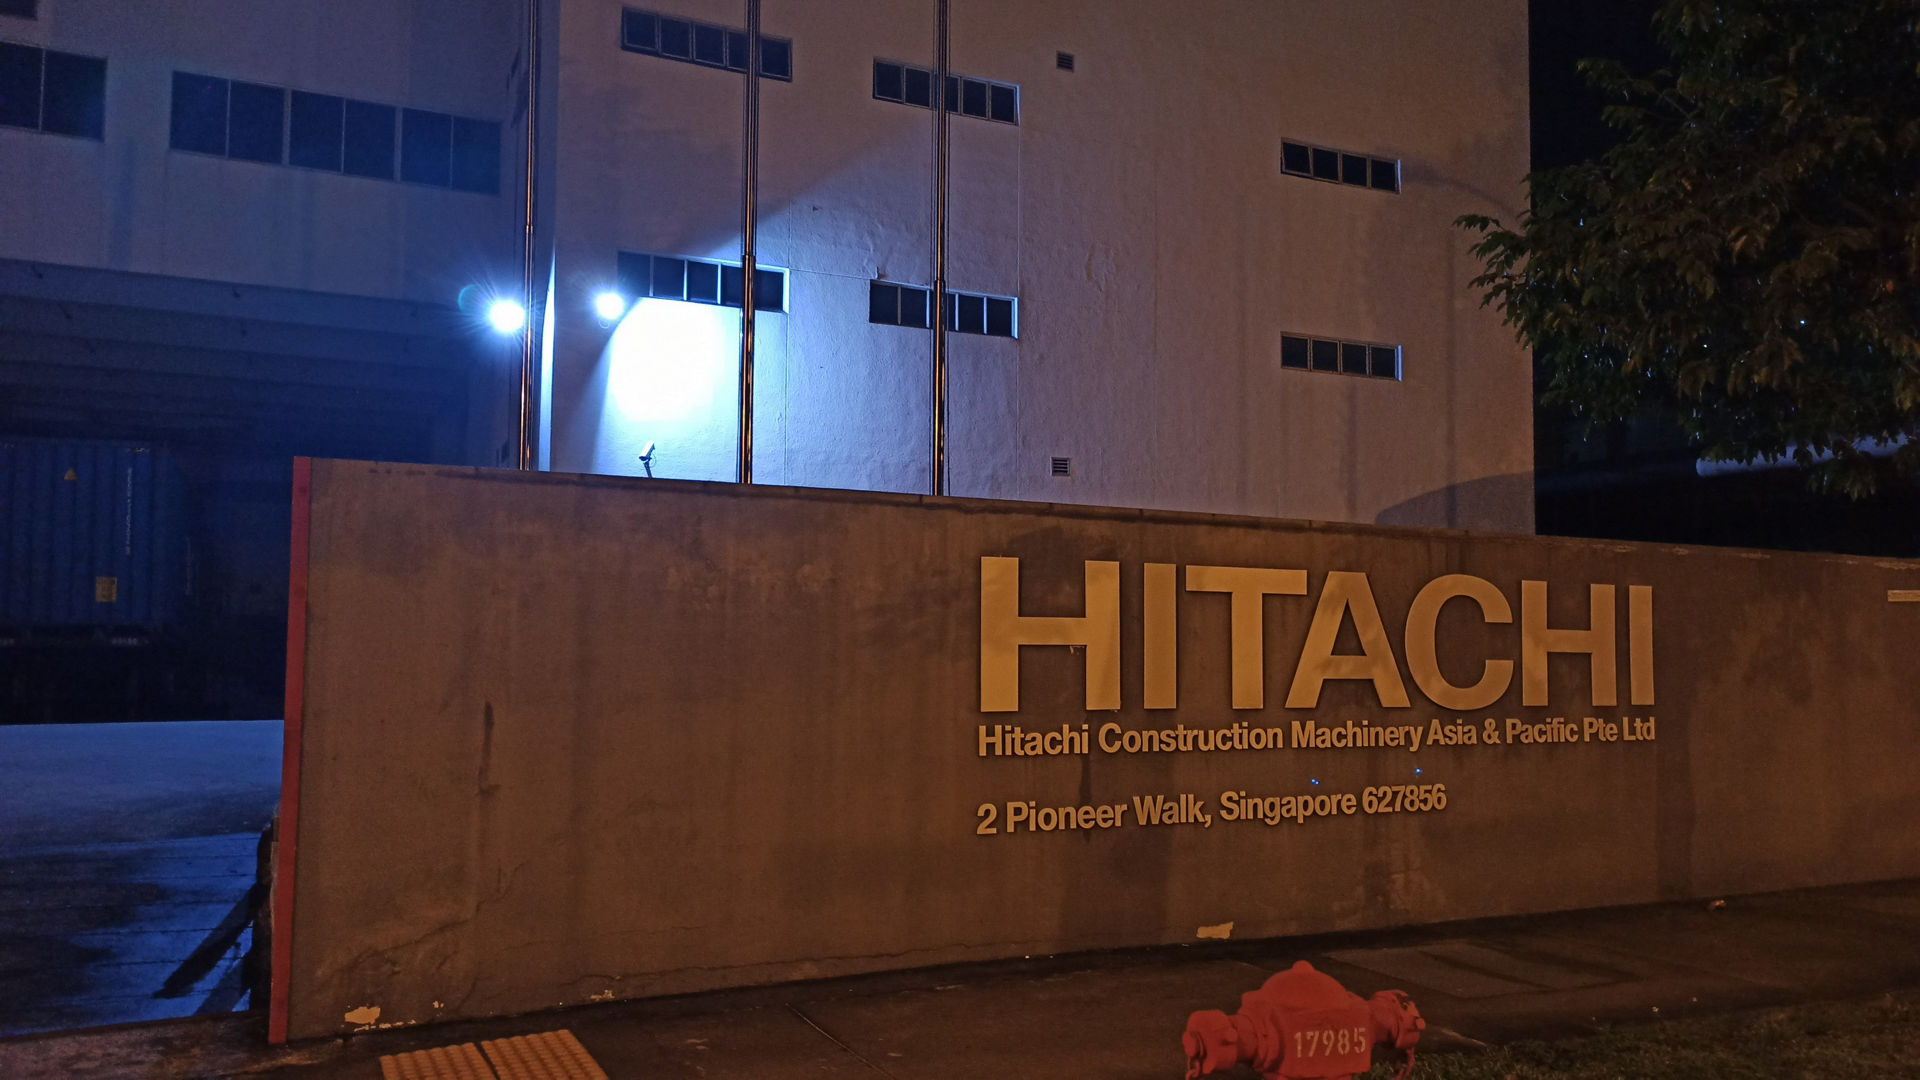 Hitachi Construction Machinery Asia and Pacific